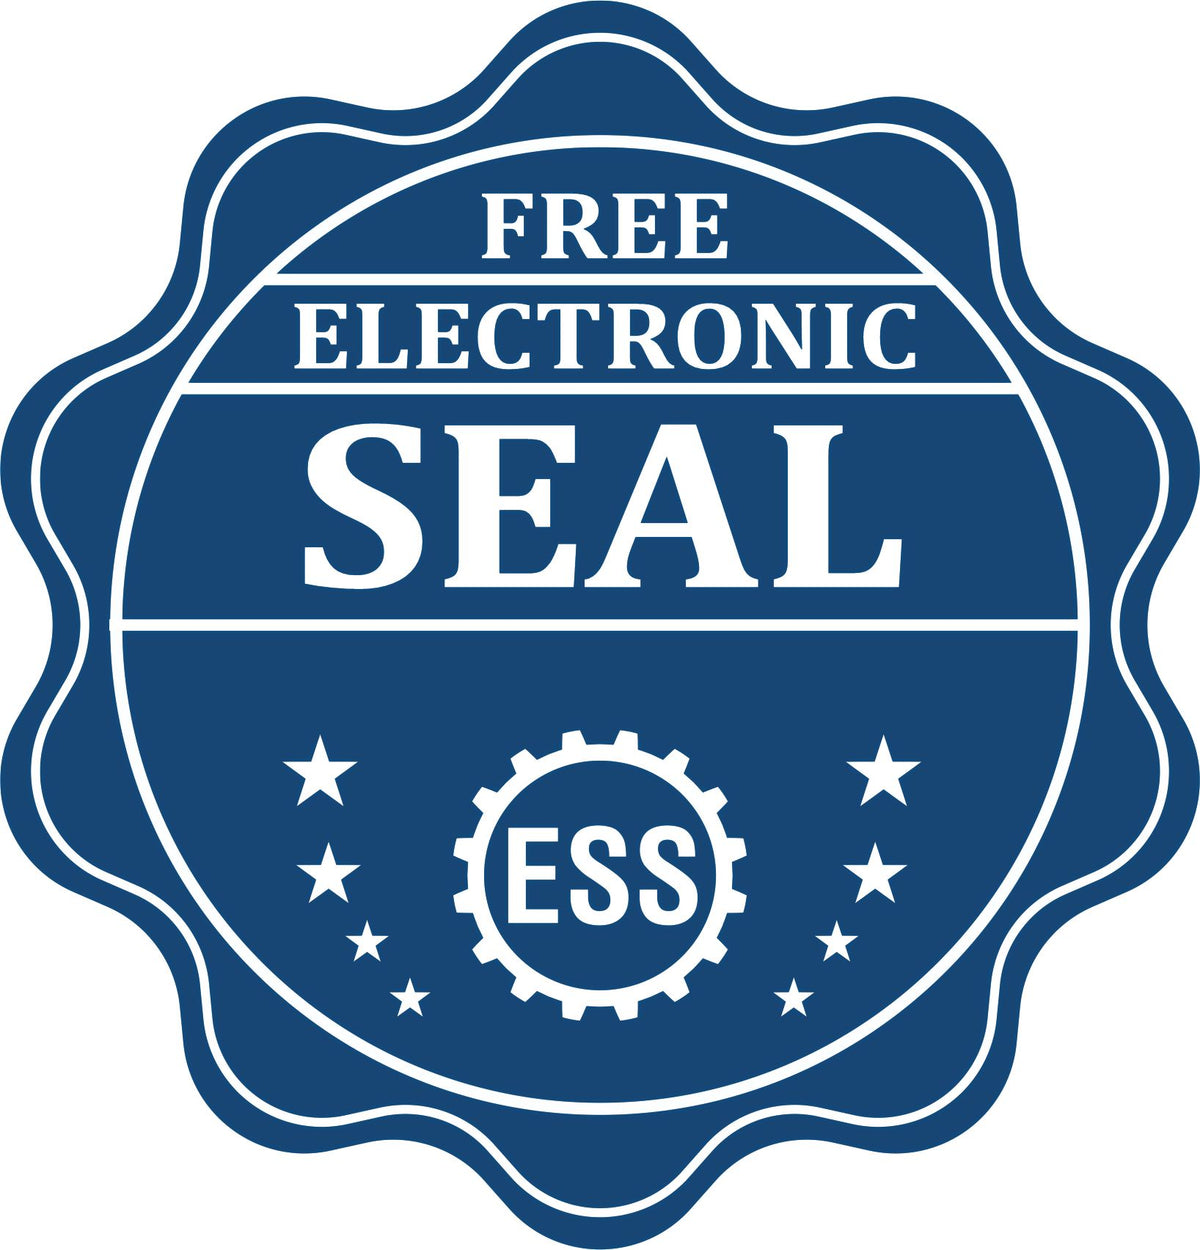 A badge showing a free electronic seal for the Handheld Ohio Professional Geologist Embosser with stars and the ESS gear on the emblem.